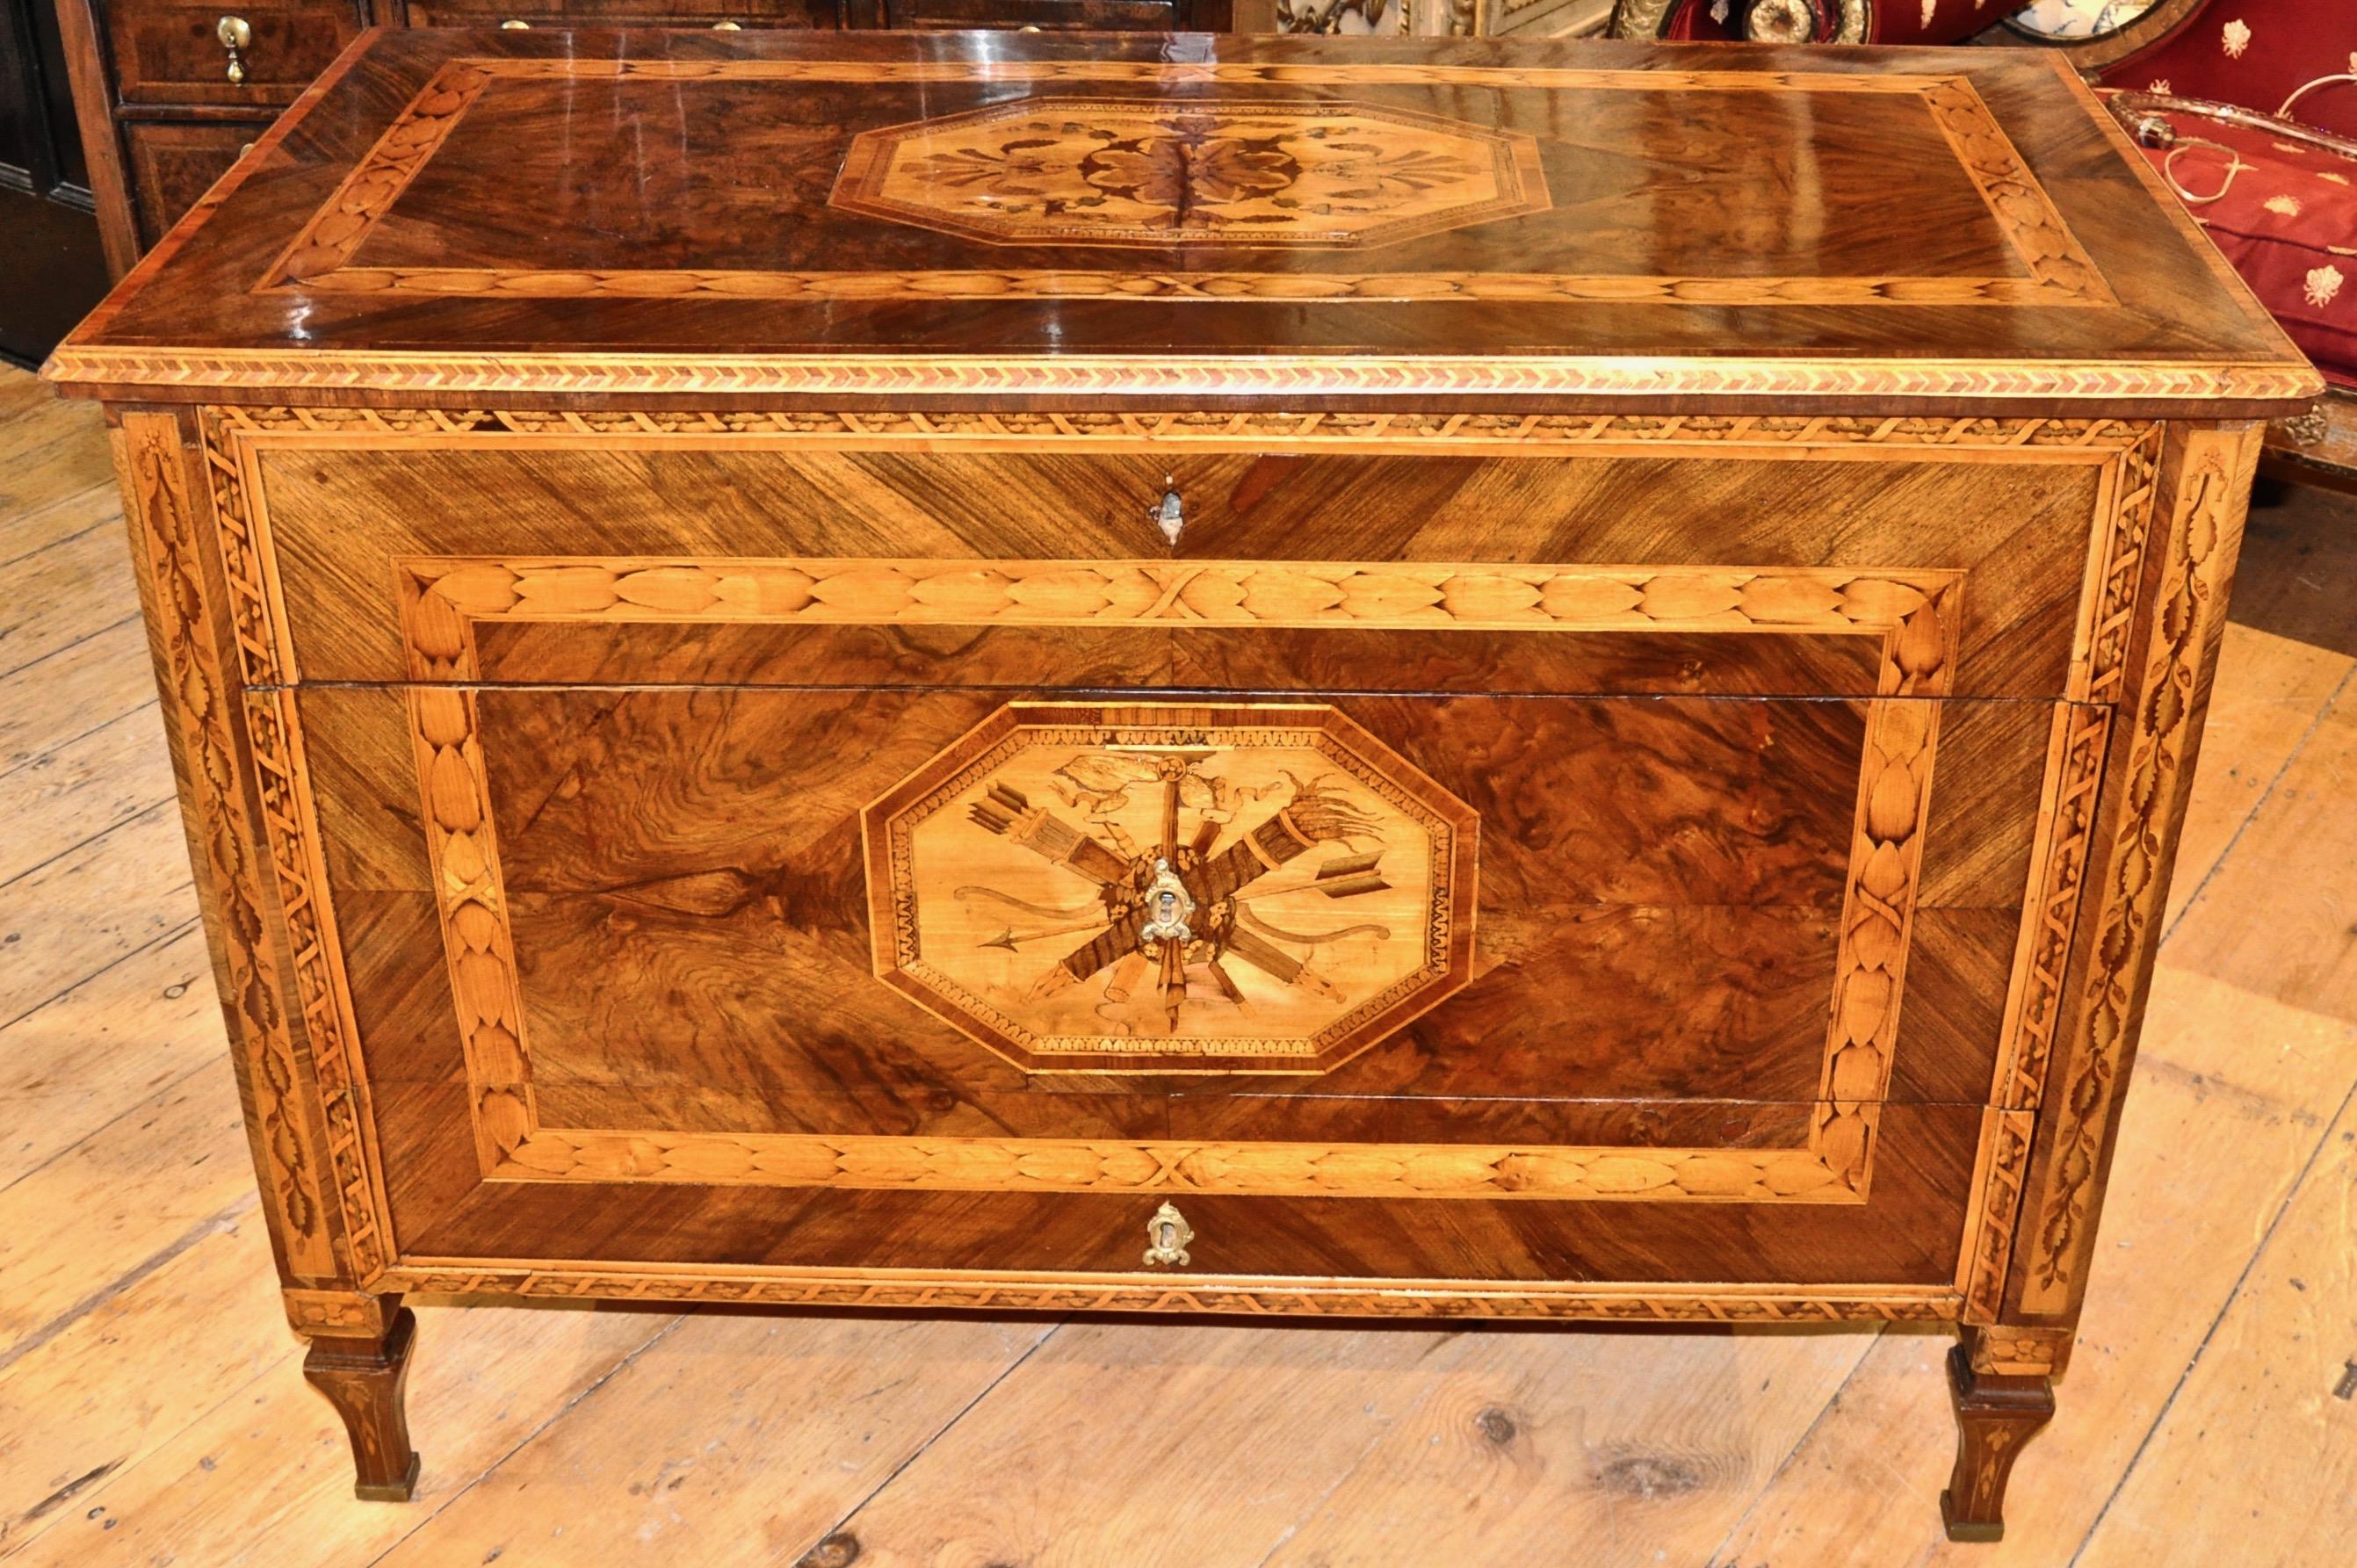 Period Italian or Milan three-drawer marquetry chest of drawers or commode.

--Beautiful original marquetry work of neoclassical trophy. 
--Laurel leaf wreath
--Bellflowers etc.